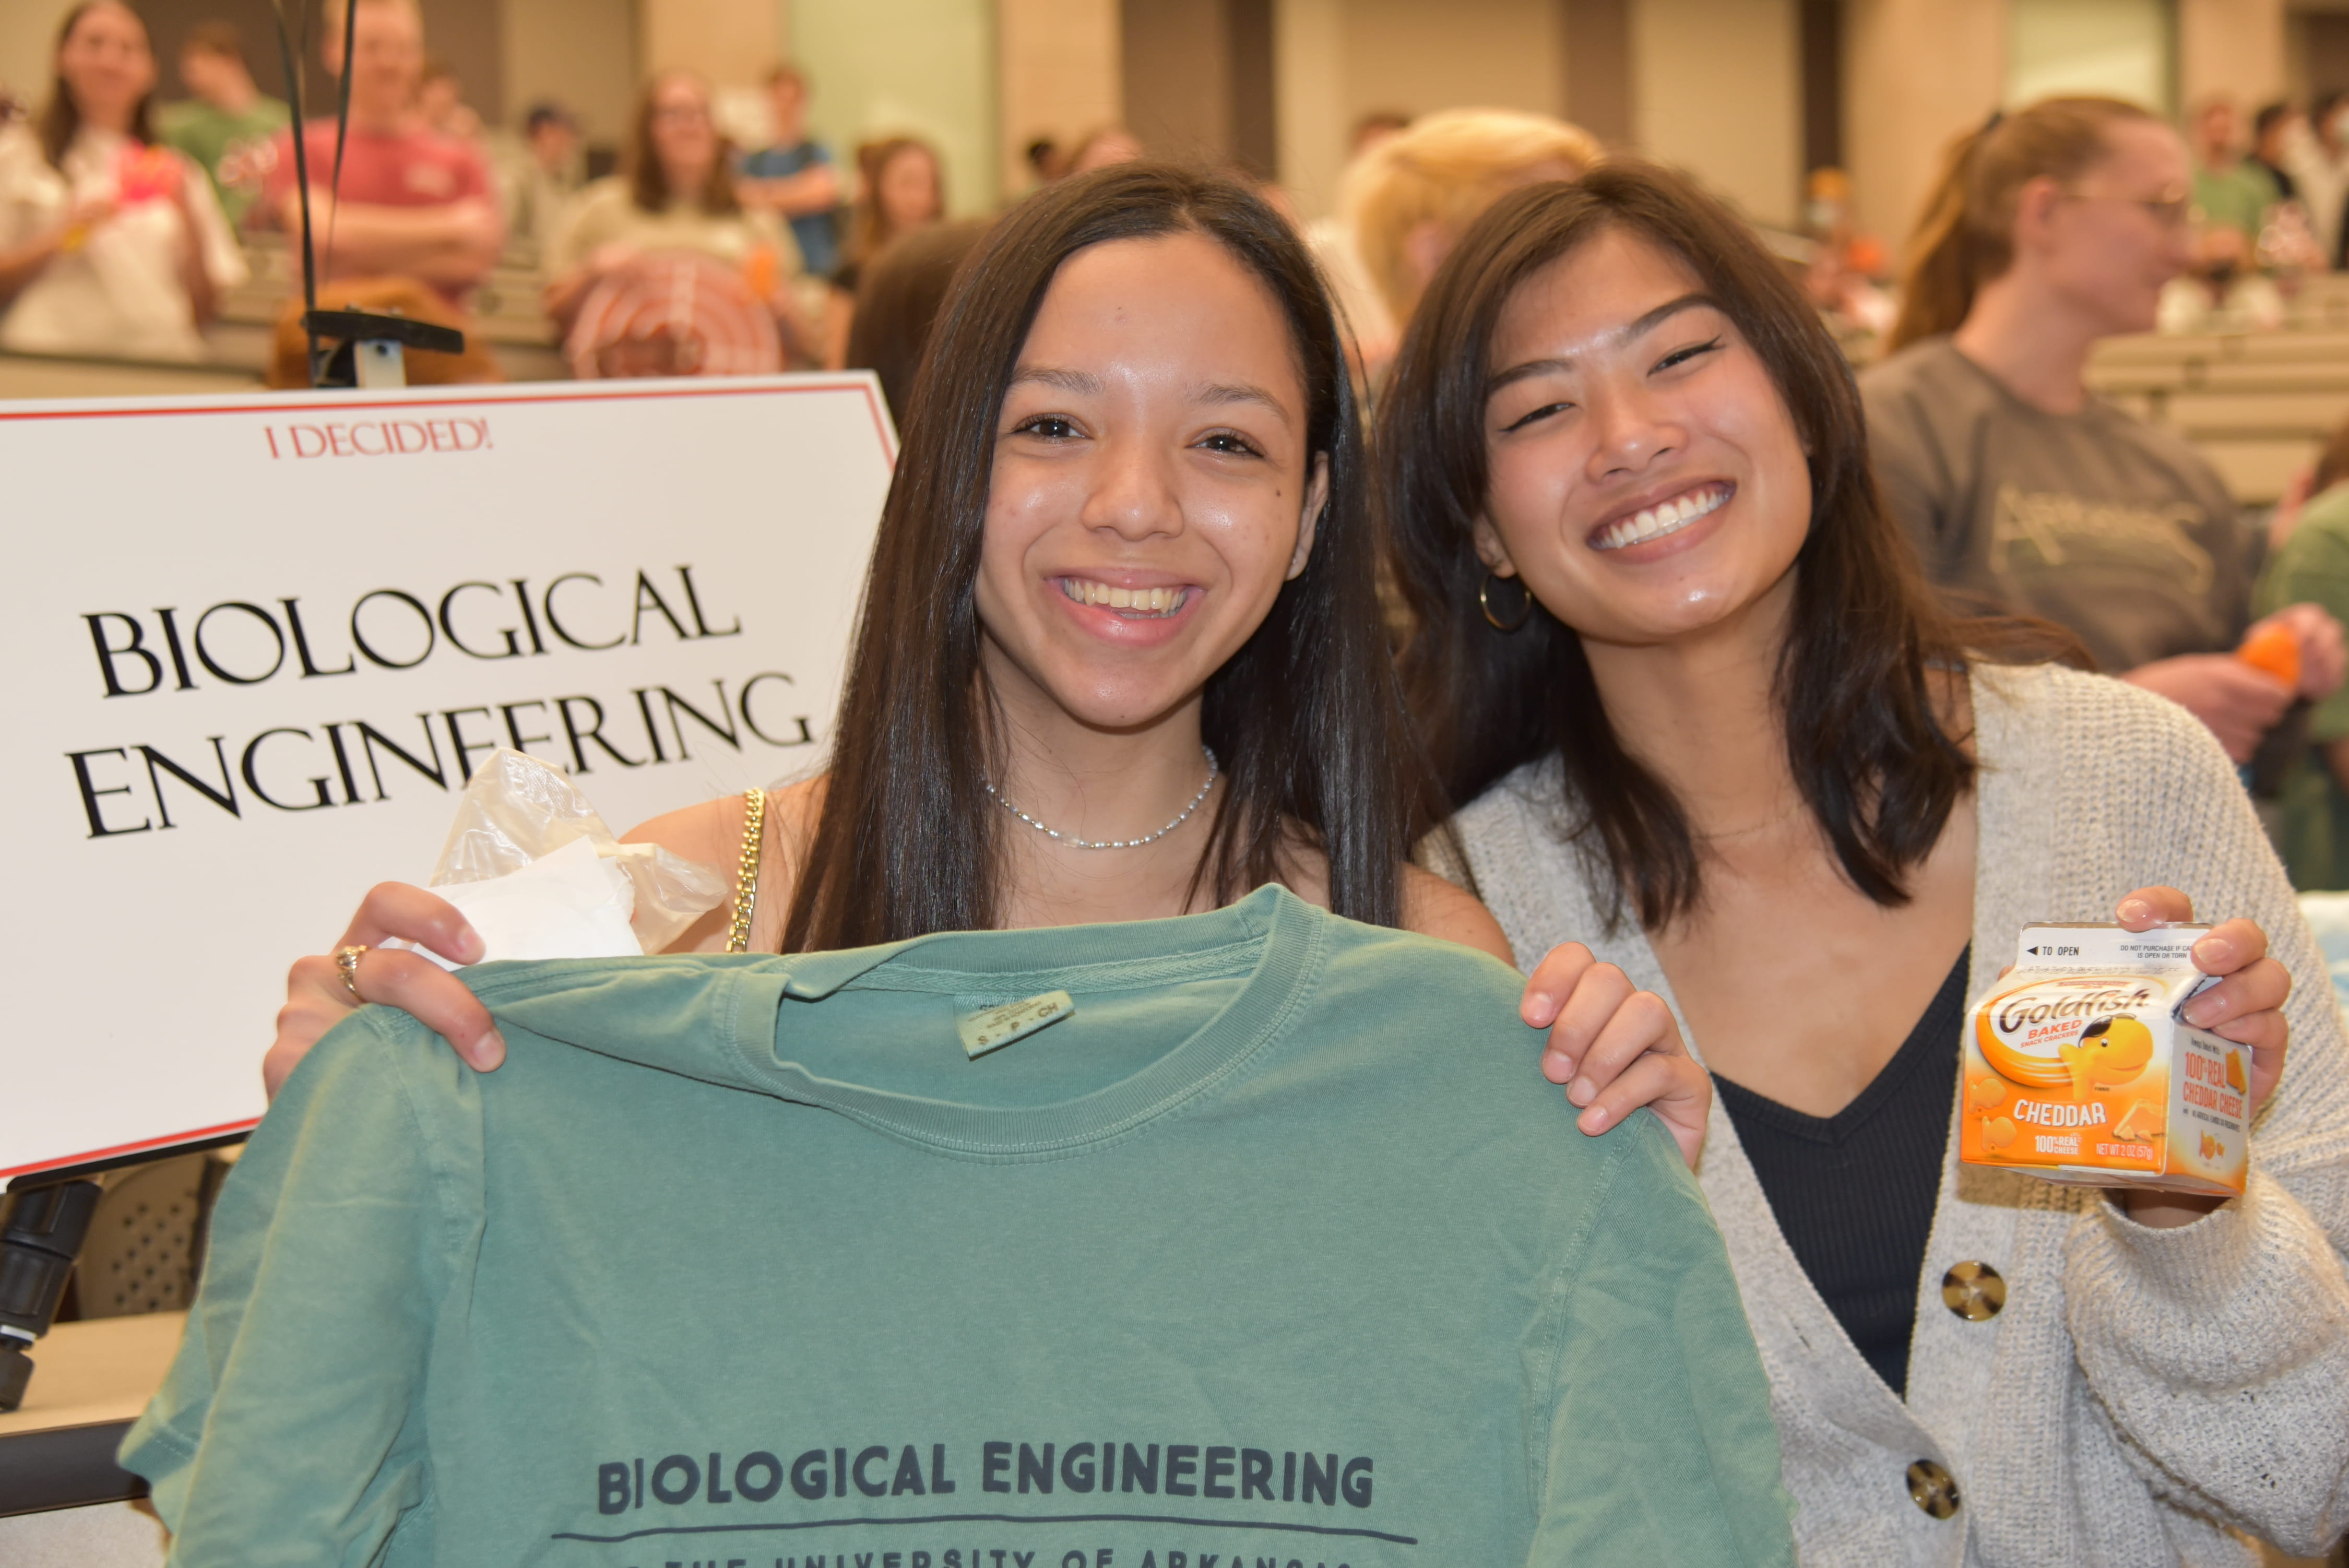 Students Maria De Los Angeles Vergara Murillo and Lillie Bolton stop to celebrate after De Los Angeles declared biological engineering as her major. 